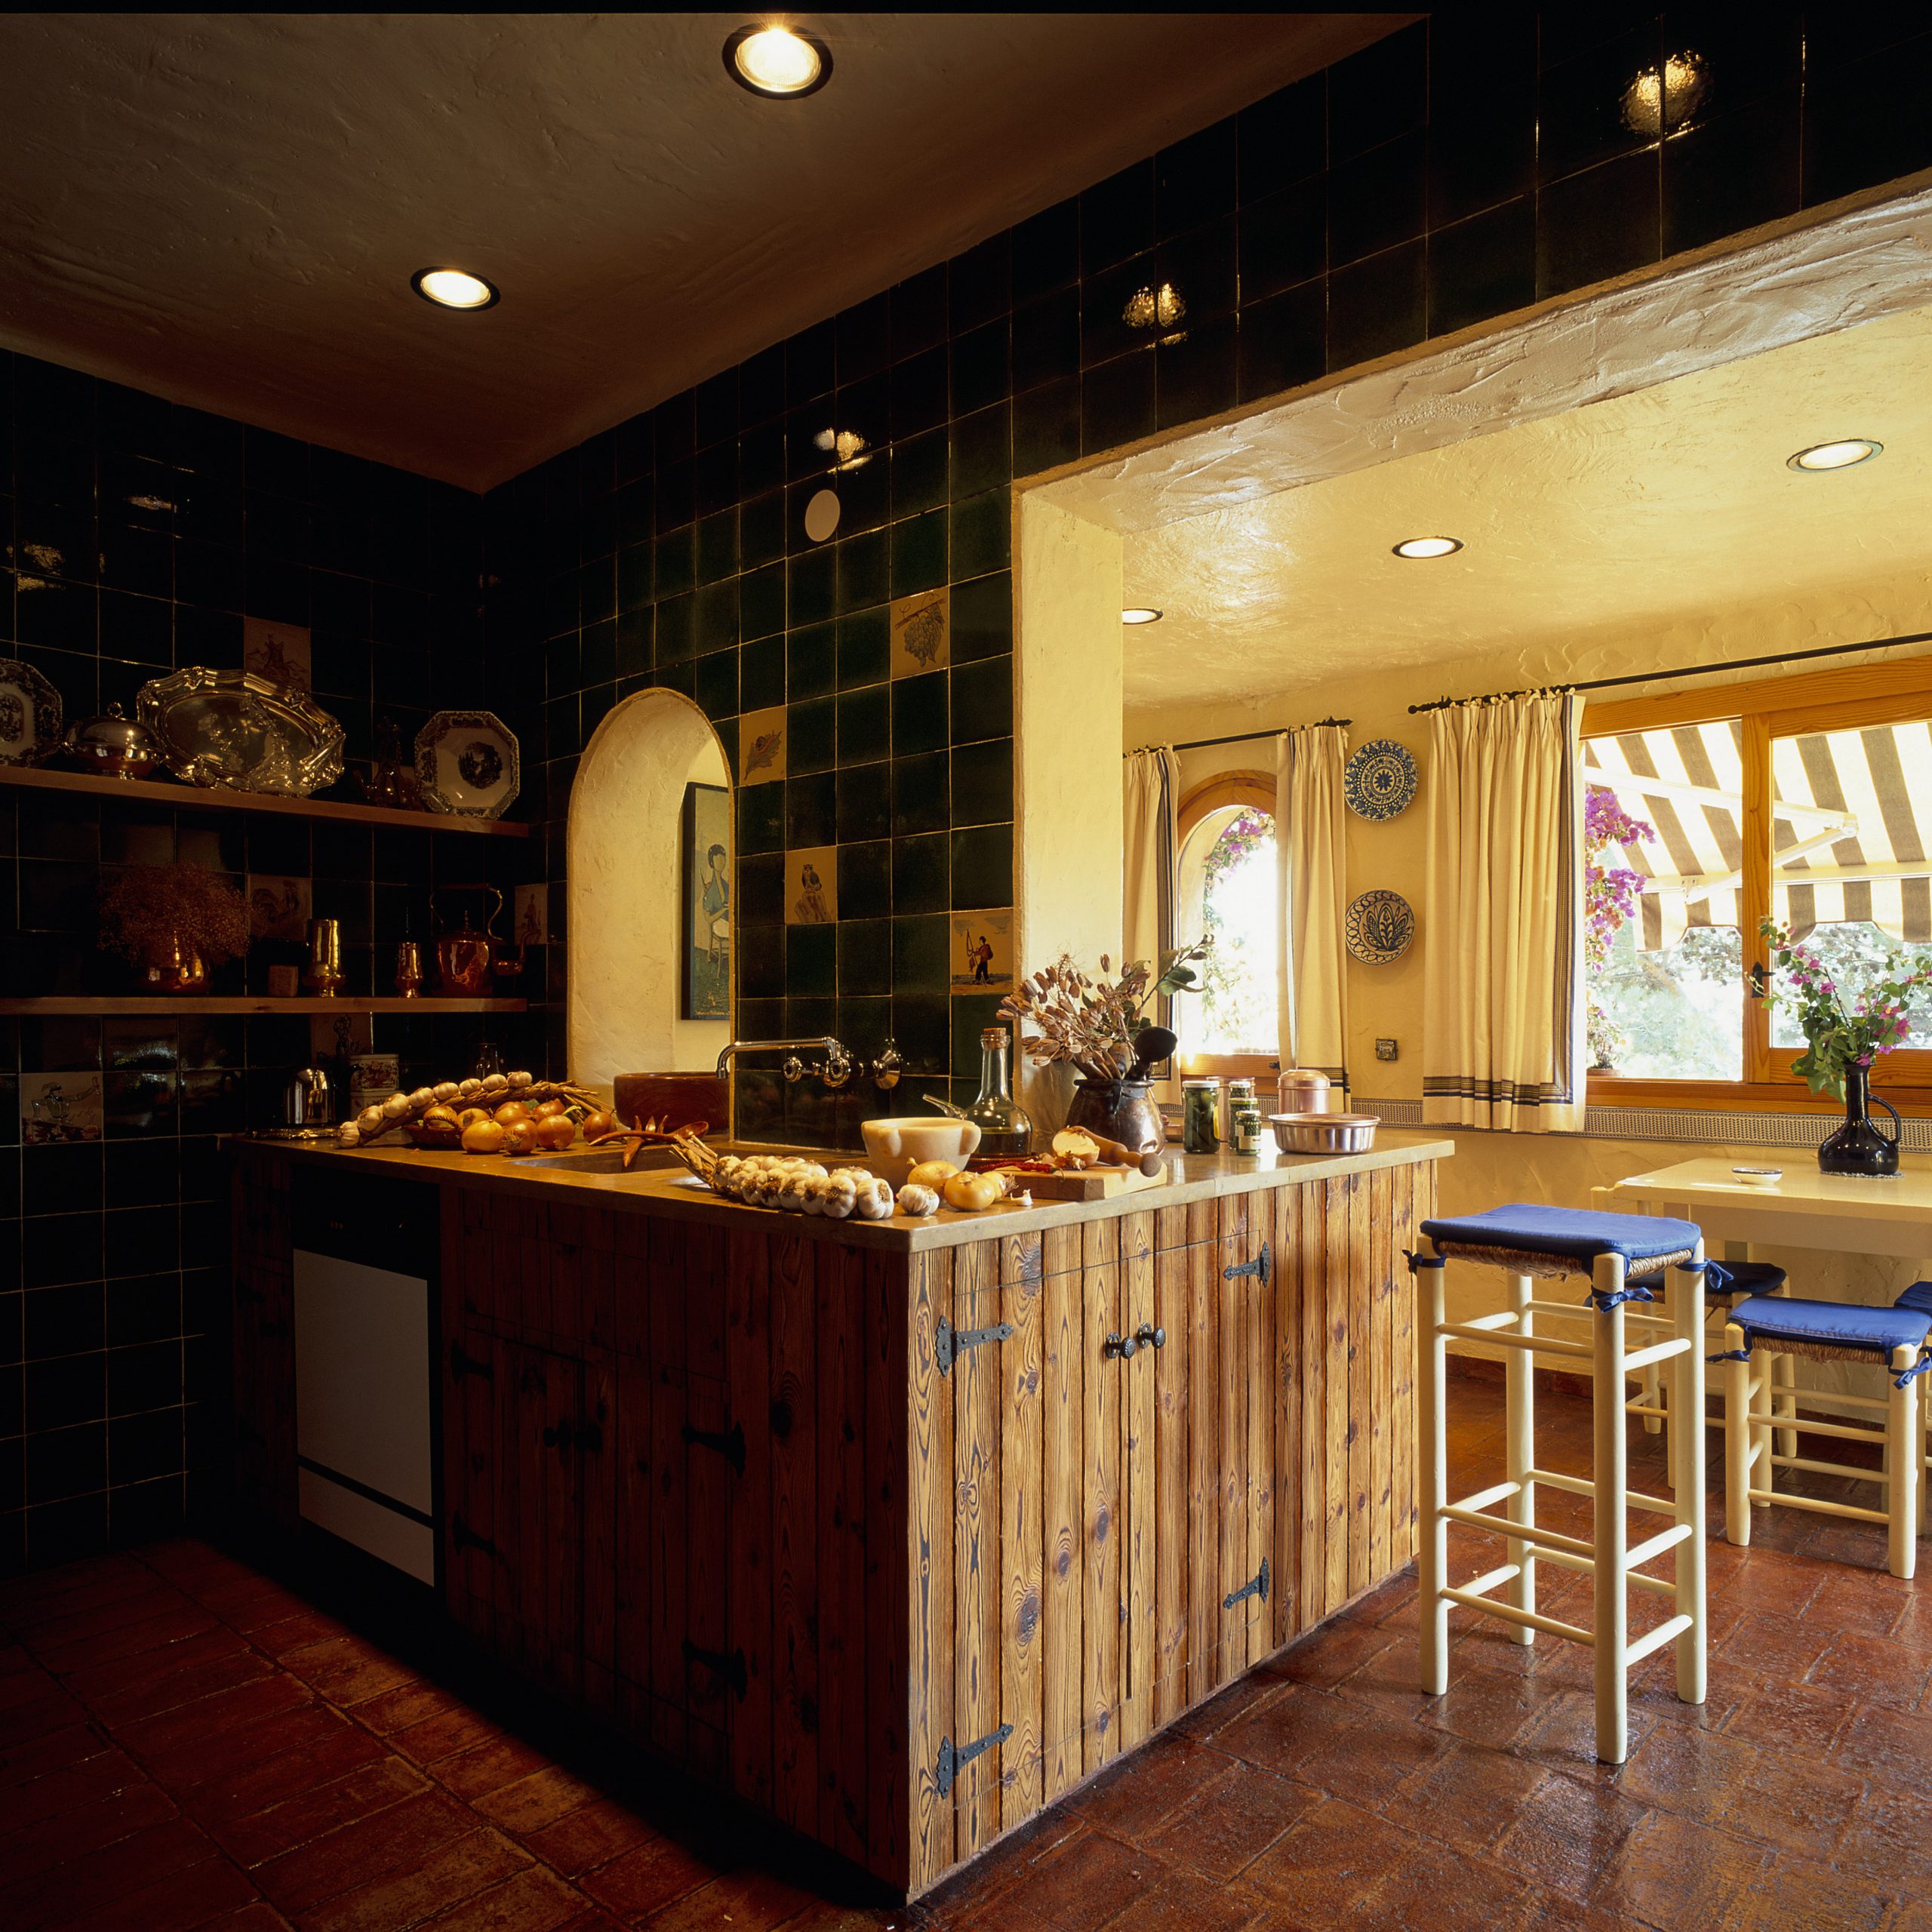 View of a homely kitchen